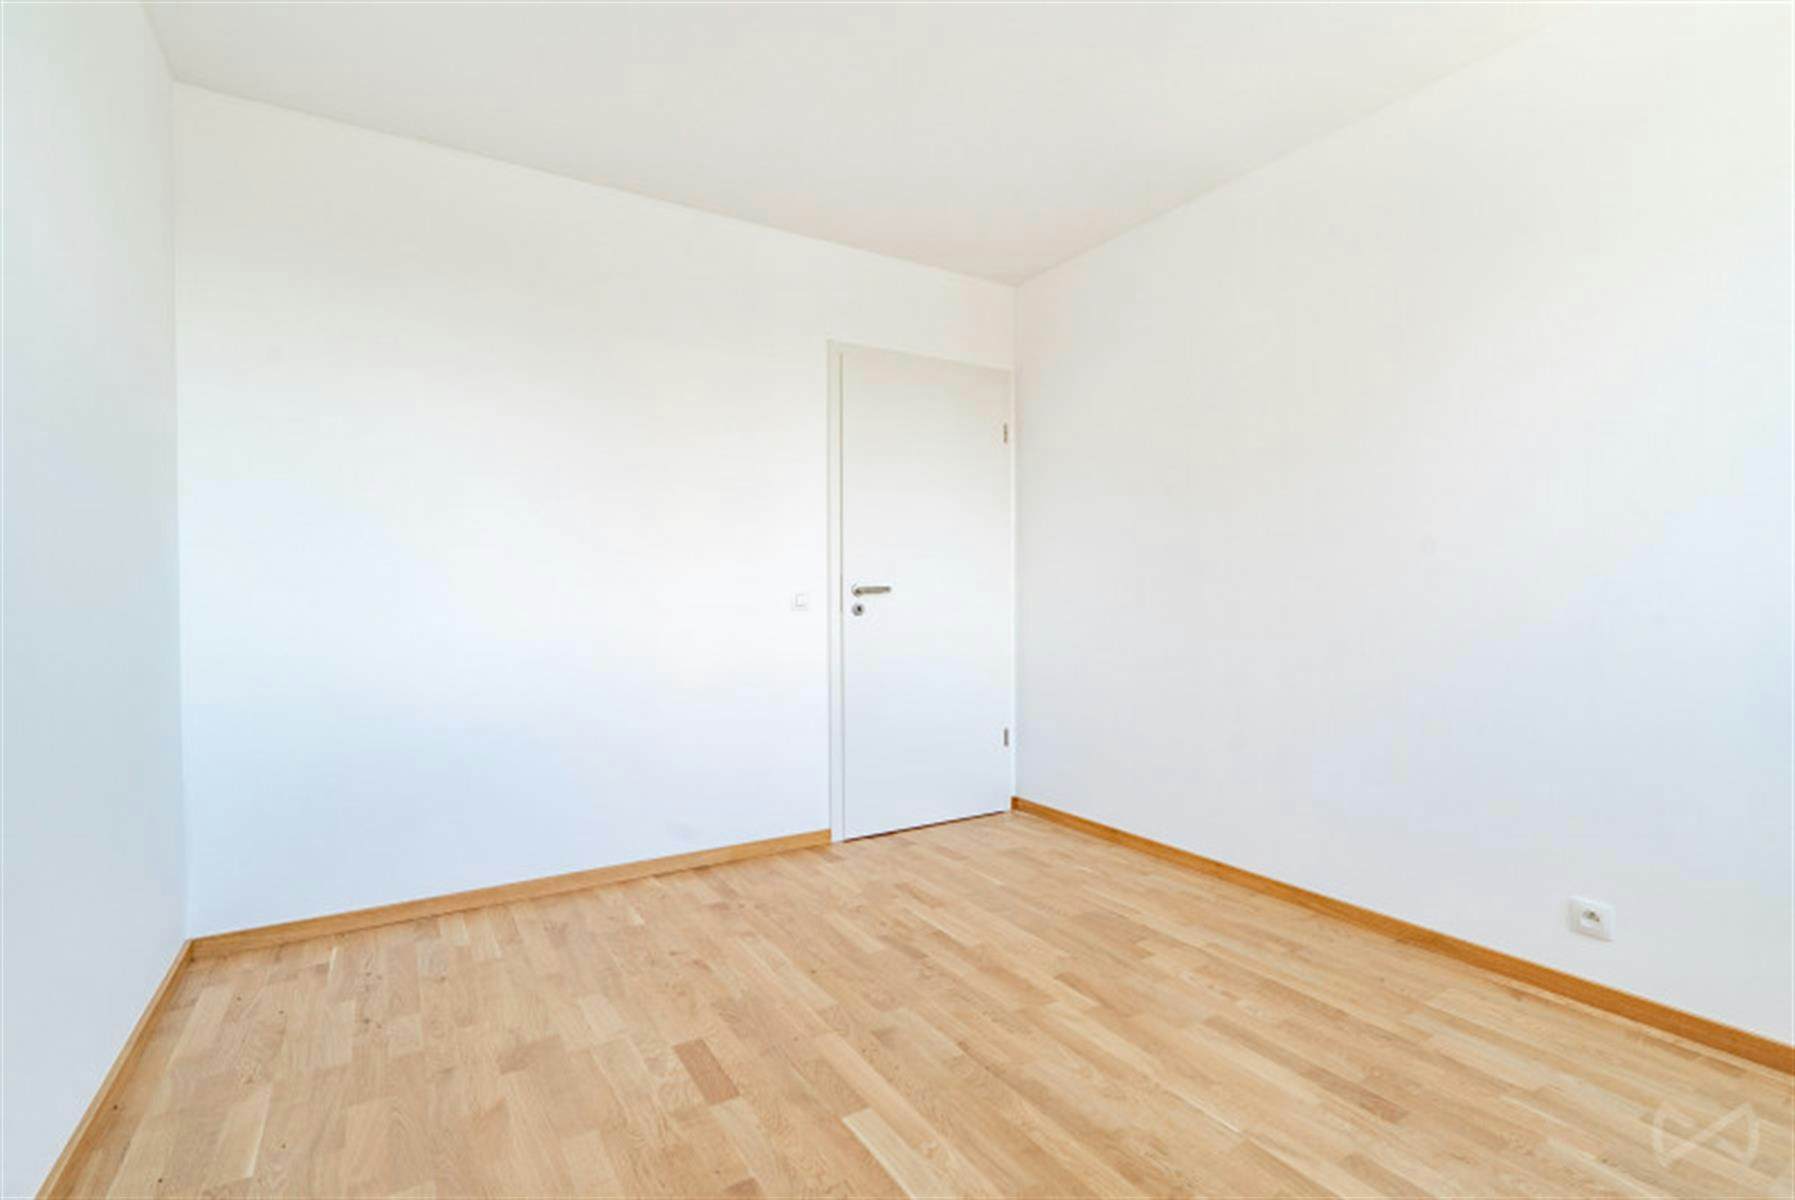 Picture 4 of 4 for Flat with two bedrooms in Mons